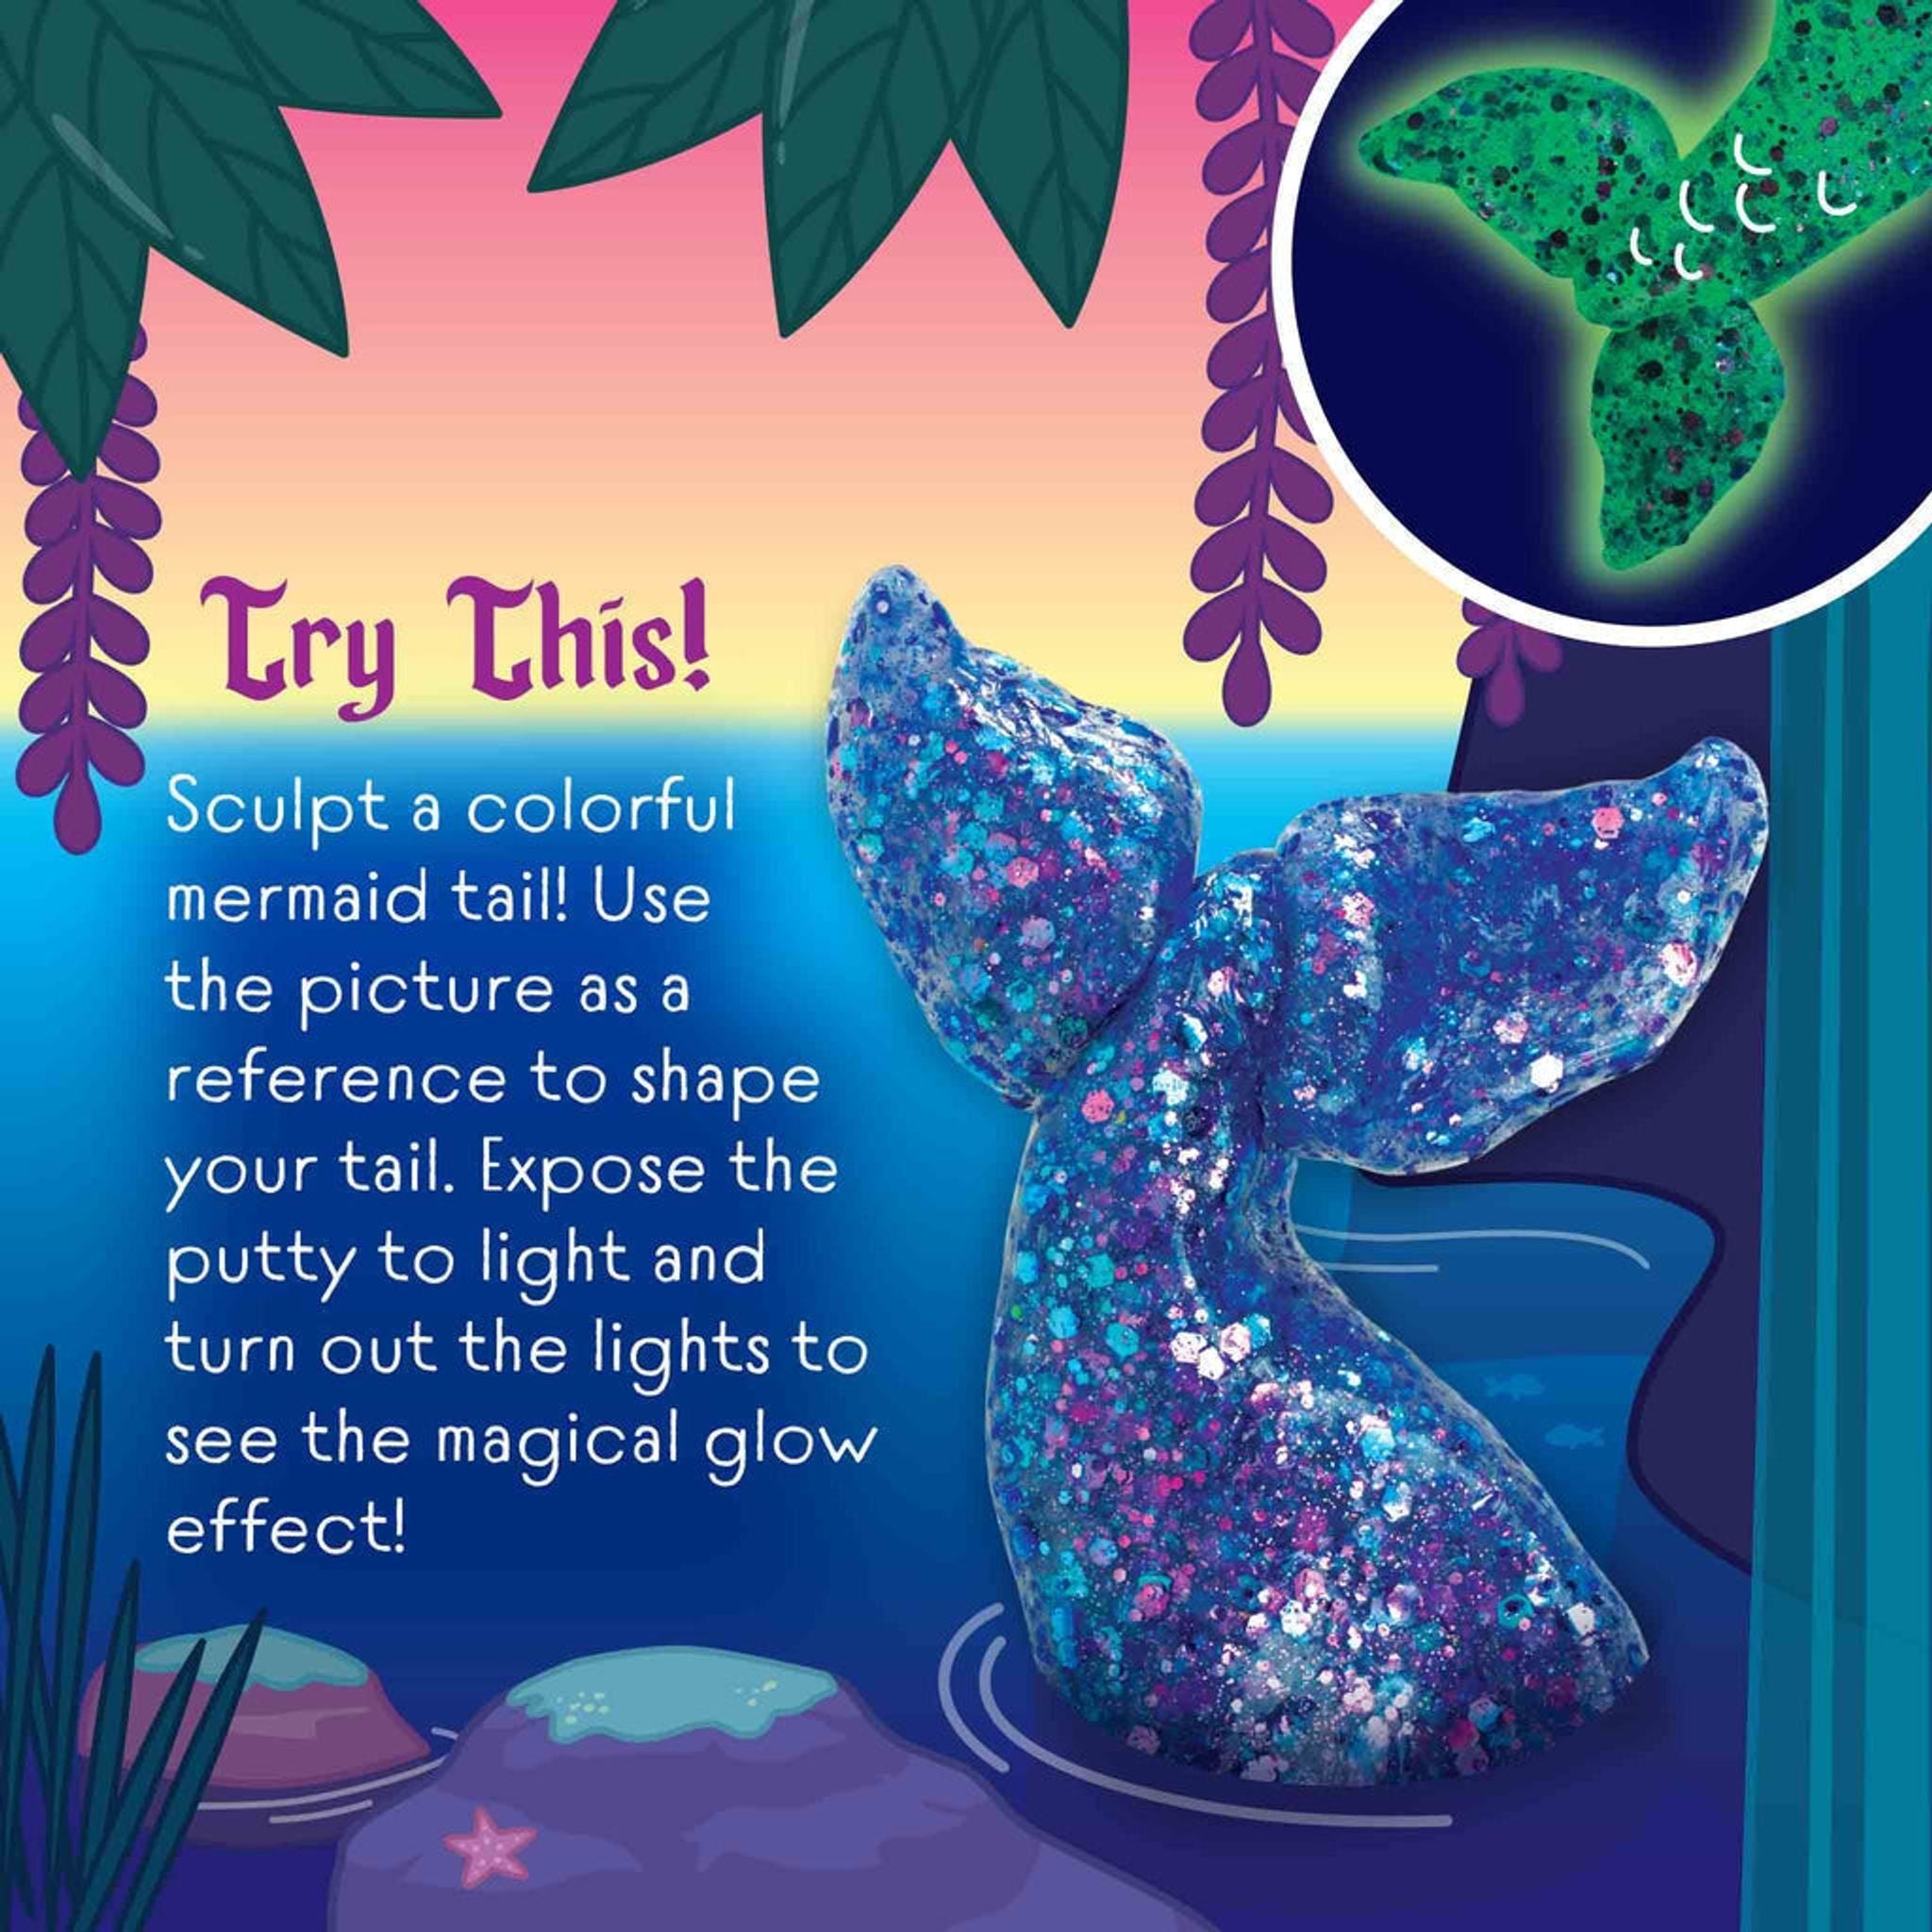 Crazy Aaron's Putty Mermaid Tale - Glowbrights - Toybox Tales